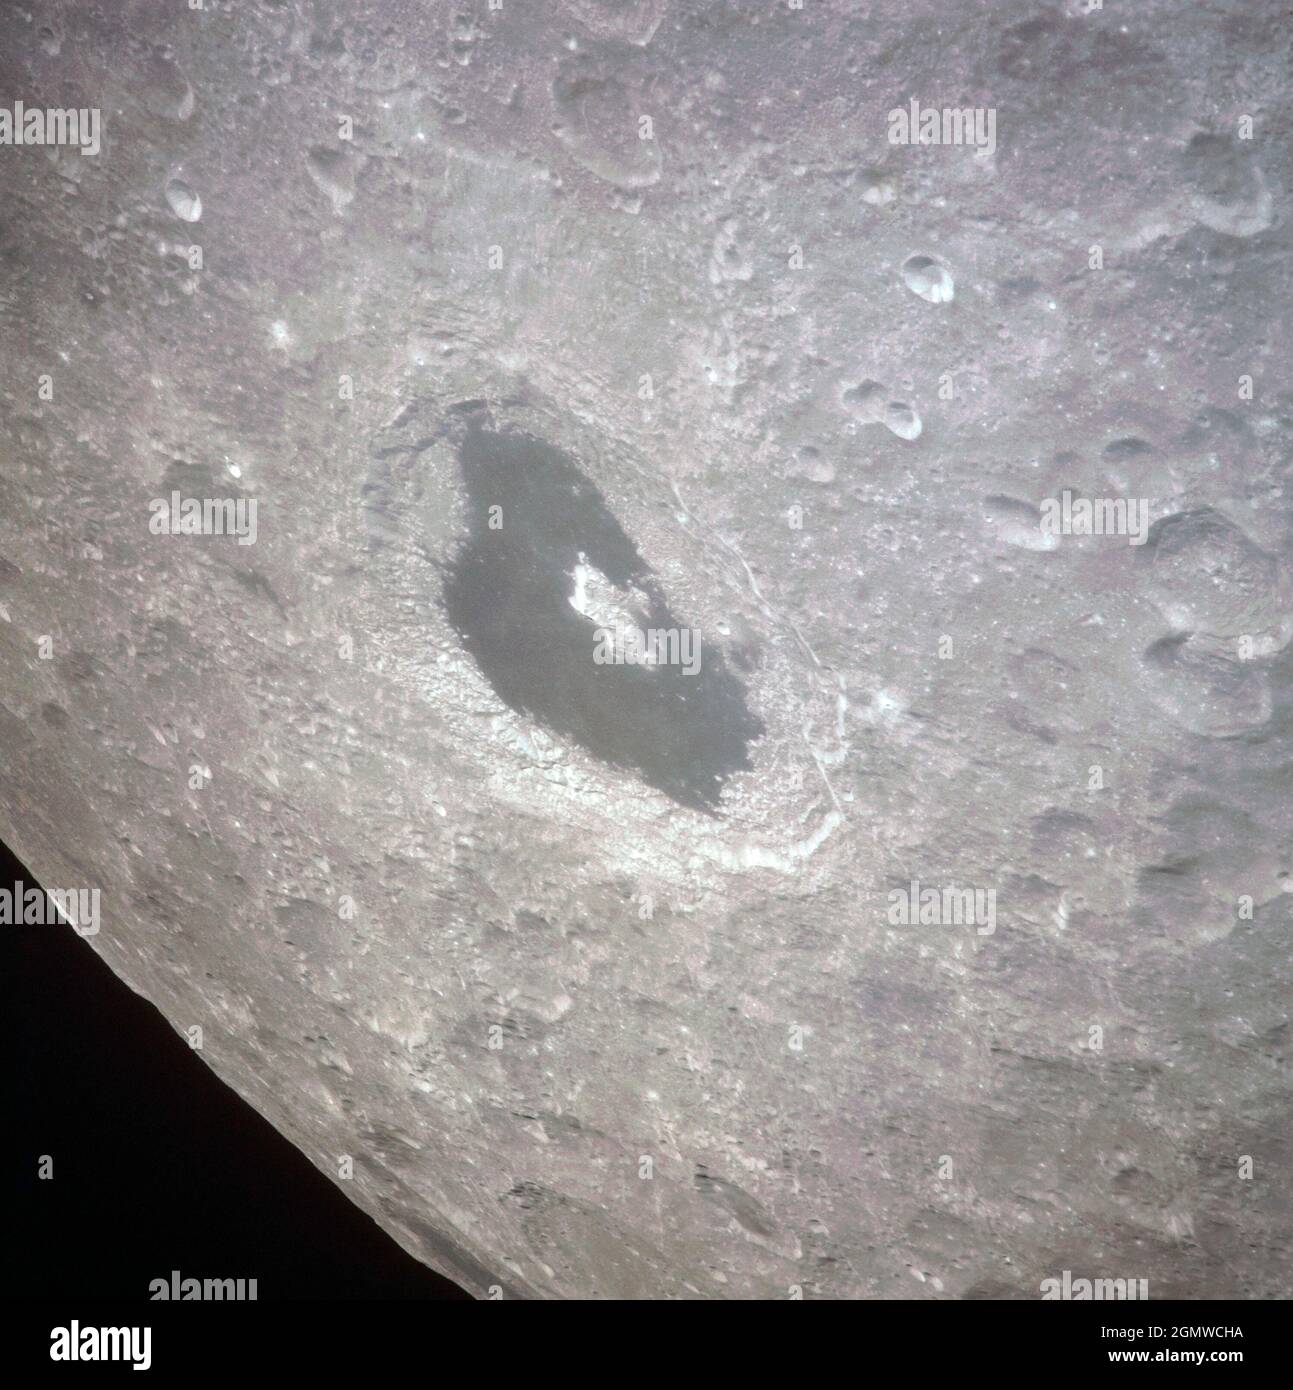 (14 April 1970) --- Excellent view of the lunar farside showing the crater Tsiolkovsky, as photographed by the crew of the Apollo 13 mission during their lunar pass. The view is looking southeast toward the lunar horizon. The approximate coordinates of Tsiolkovsky are 128.5 degrees east longitude and 20.5 degrees south latitude. The Apollo 13 crew members were forced to cancel their scheduled lunar landing because of an apparent explosion of oxygen tank number two in the Service Module (SM) Stock Photo